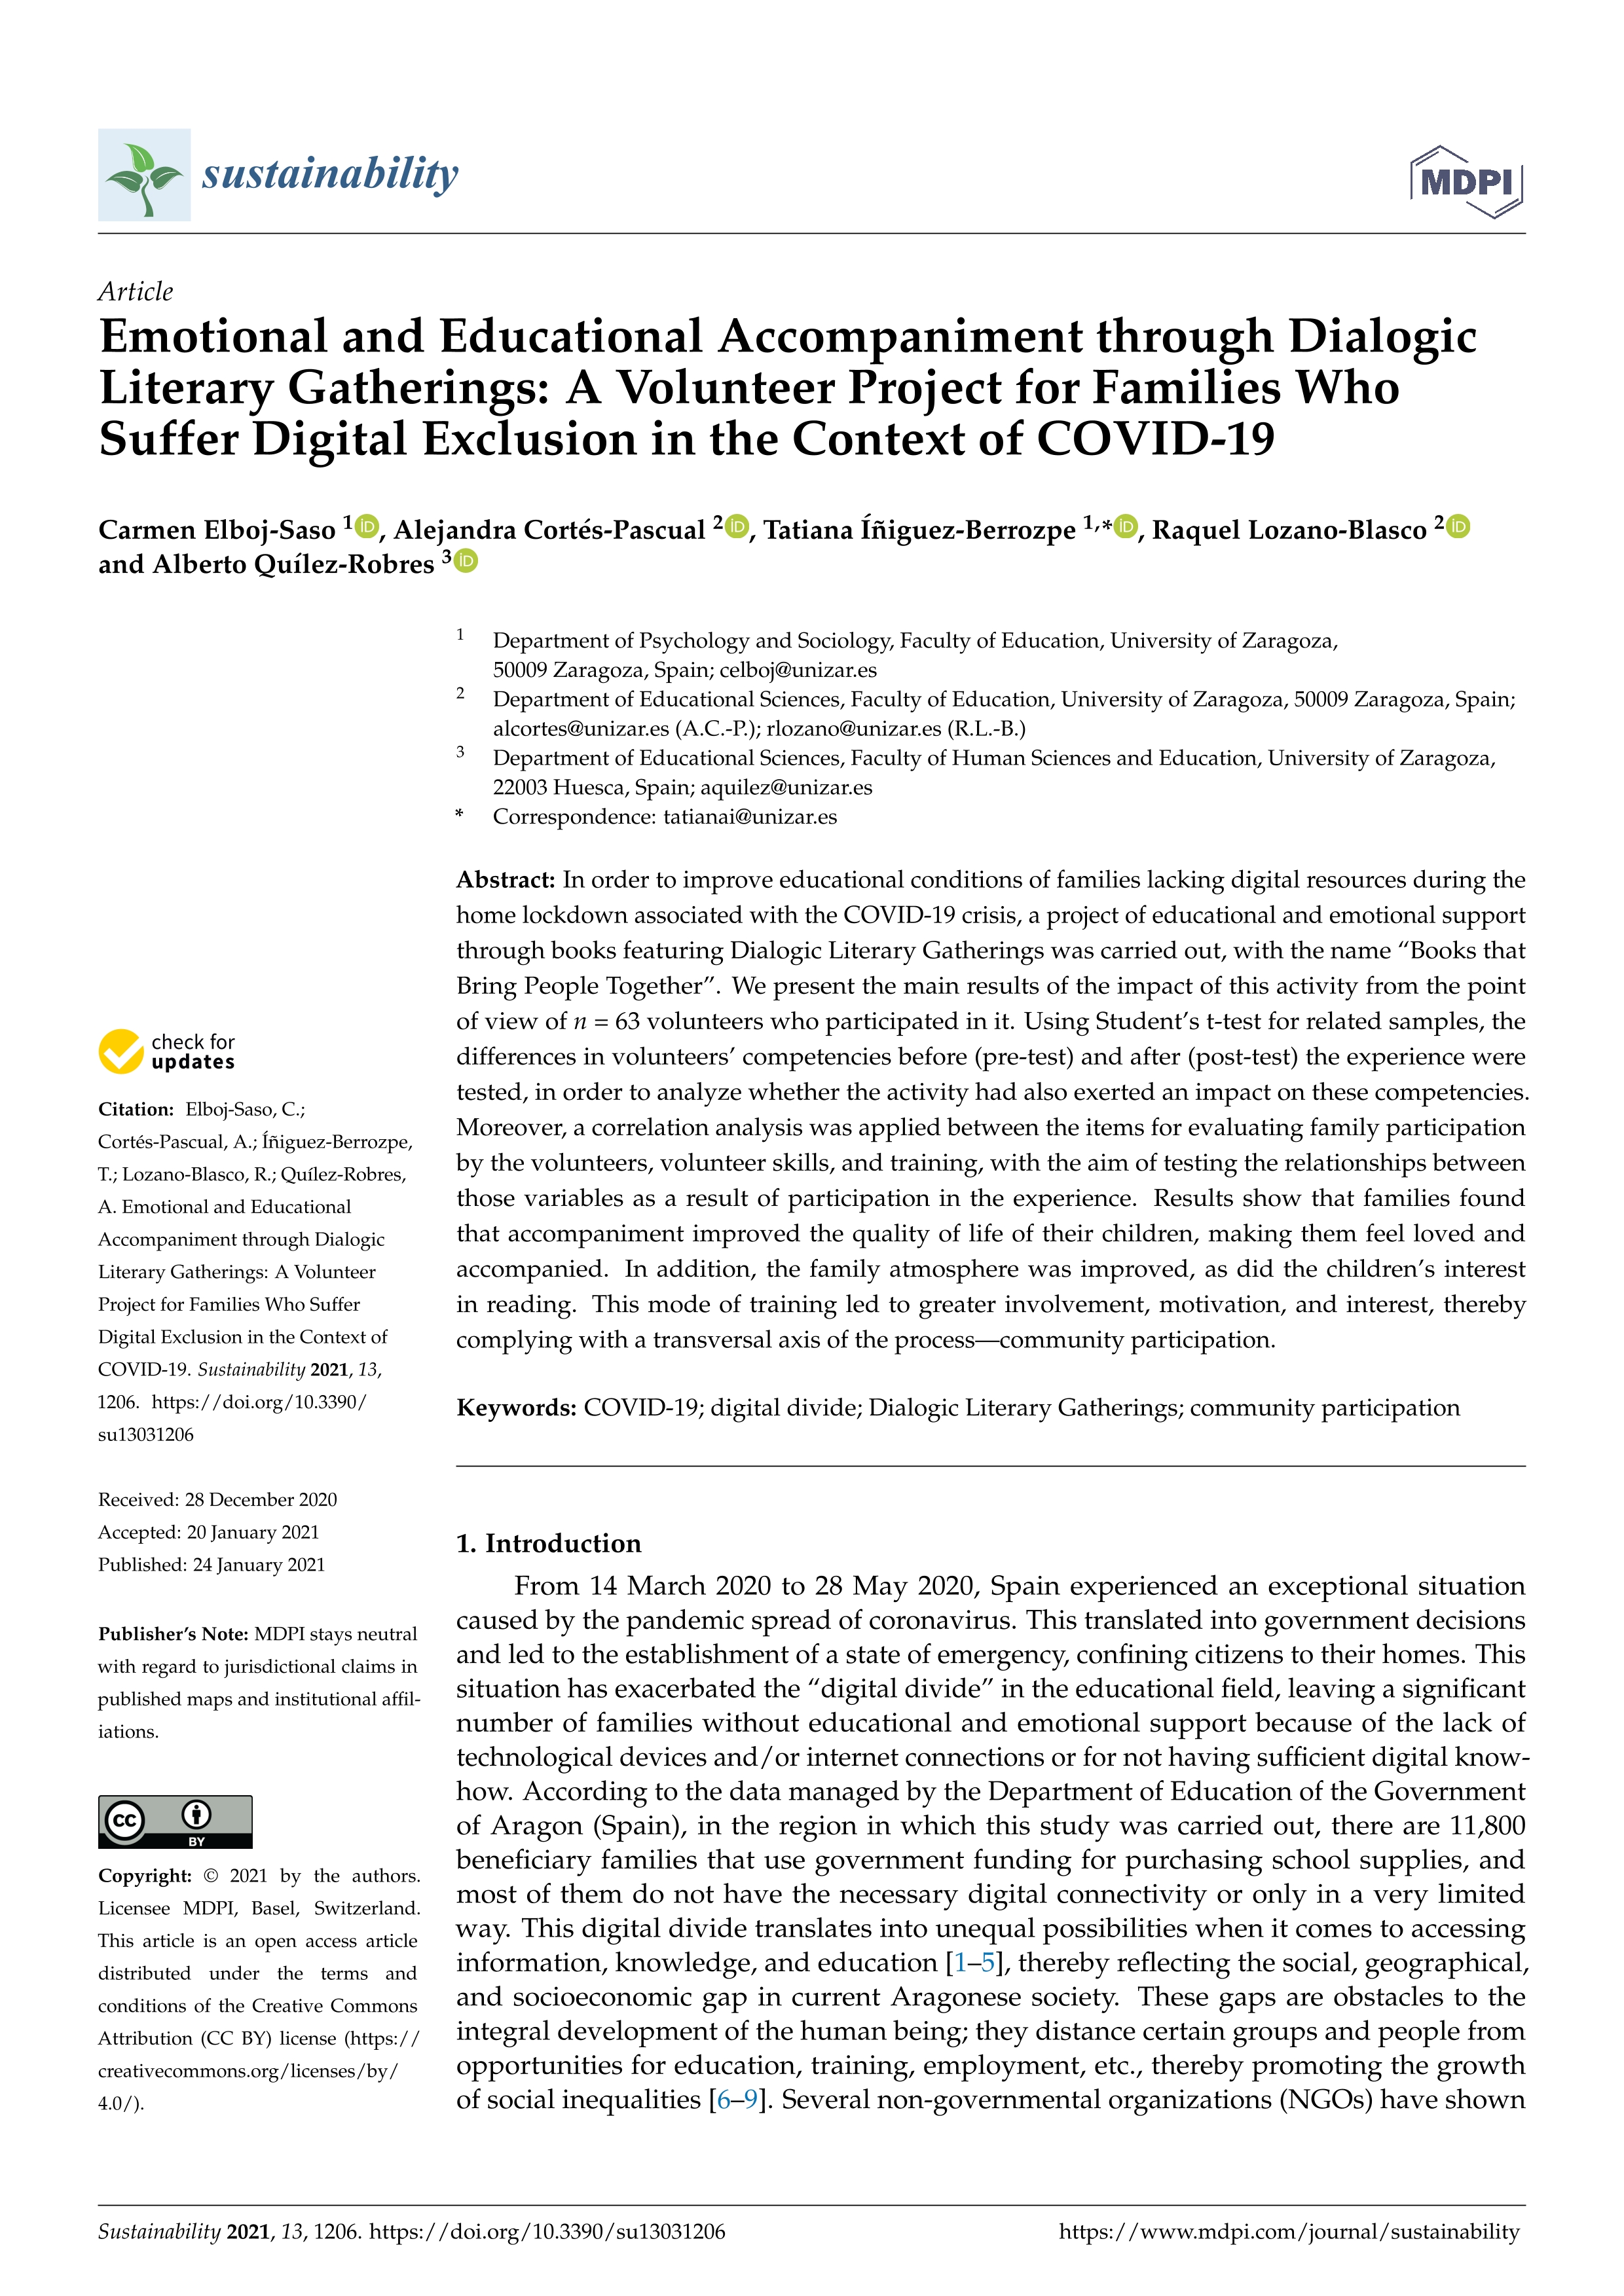 Emotional and educational accompaniment through dialogic literary gatherings: a volunteer project for families who suffer digital exclusion in the context of COVID-19